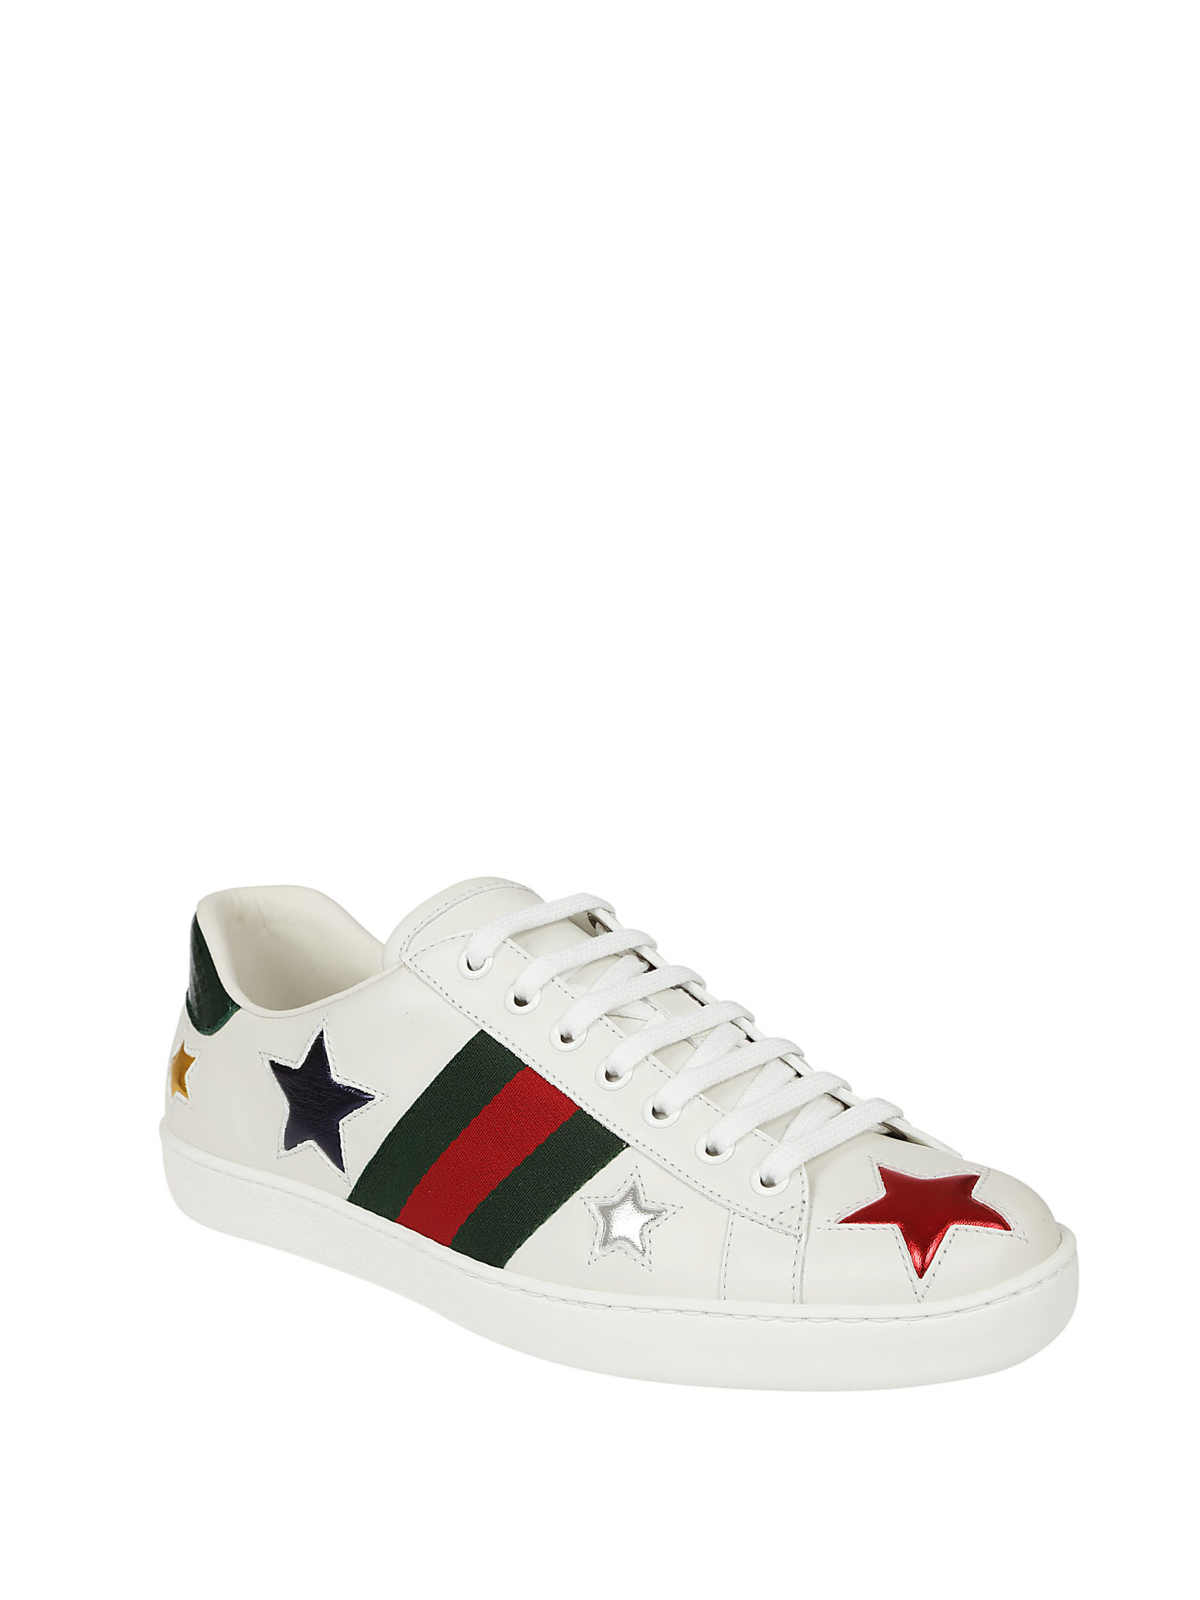 gucci embellished trainers